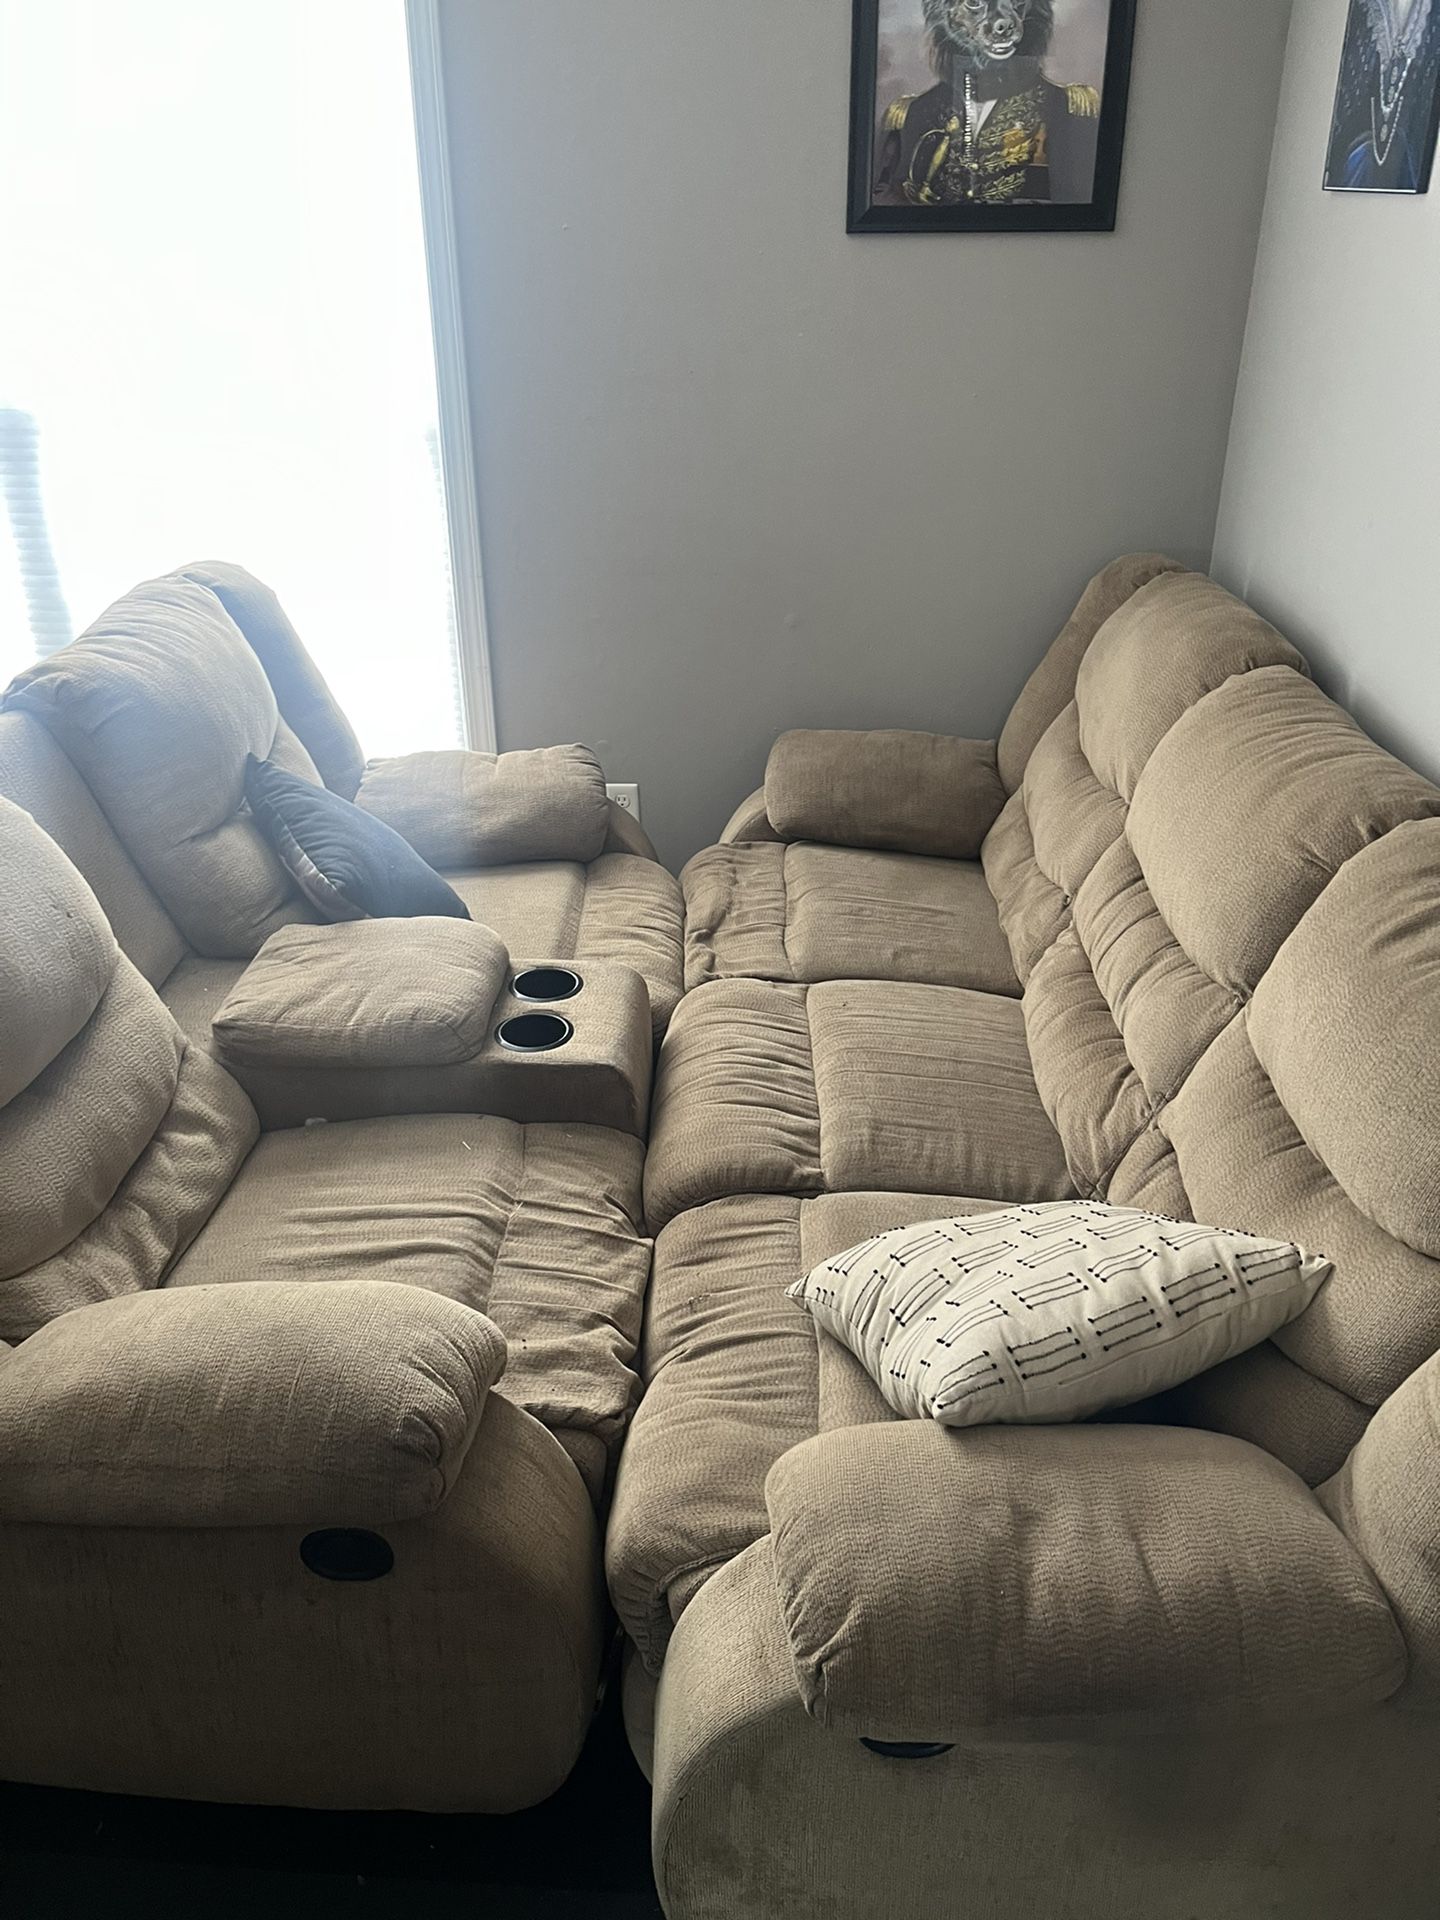 Used Sectional Still Has Life